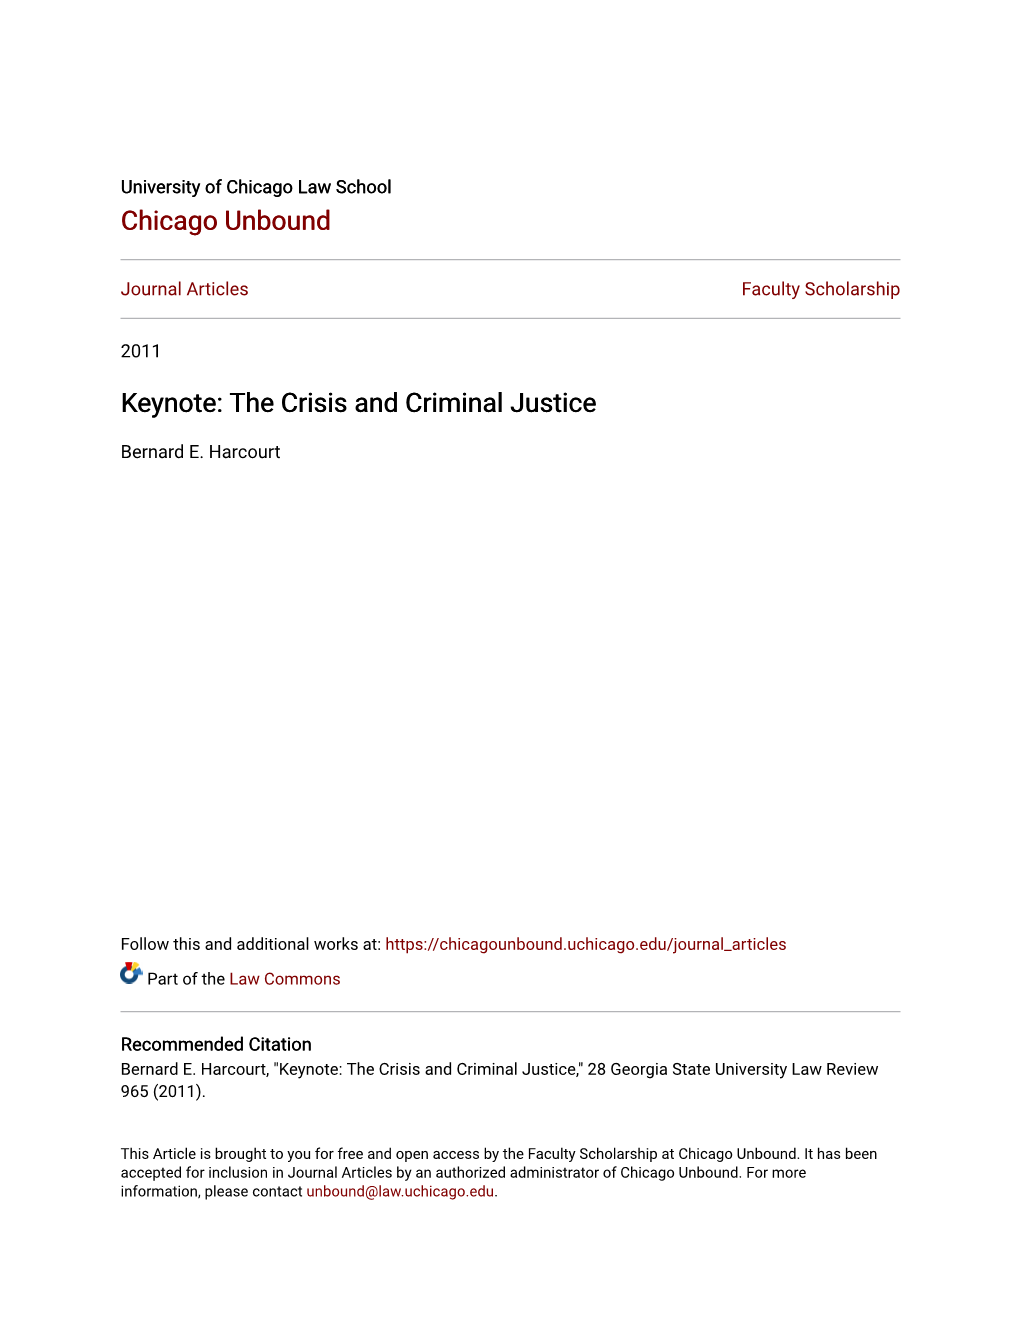 Keynote: the Crisis and Criminal Justice